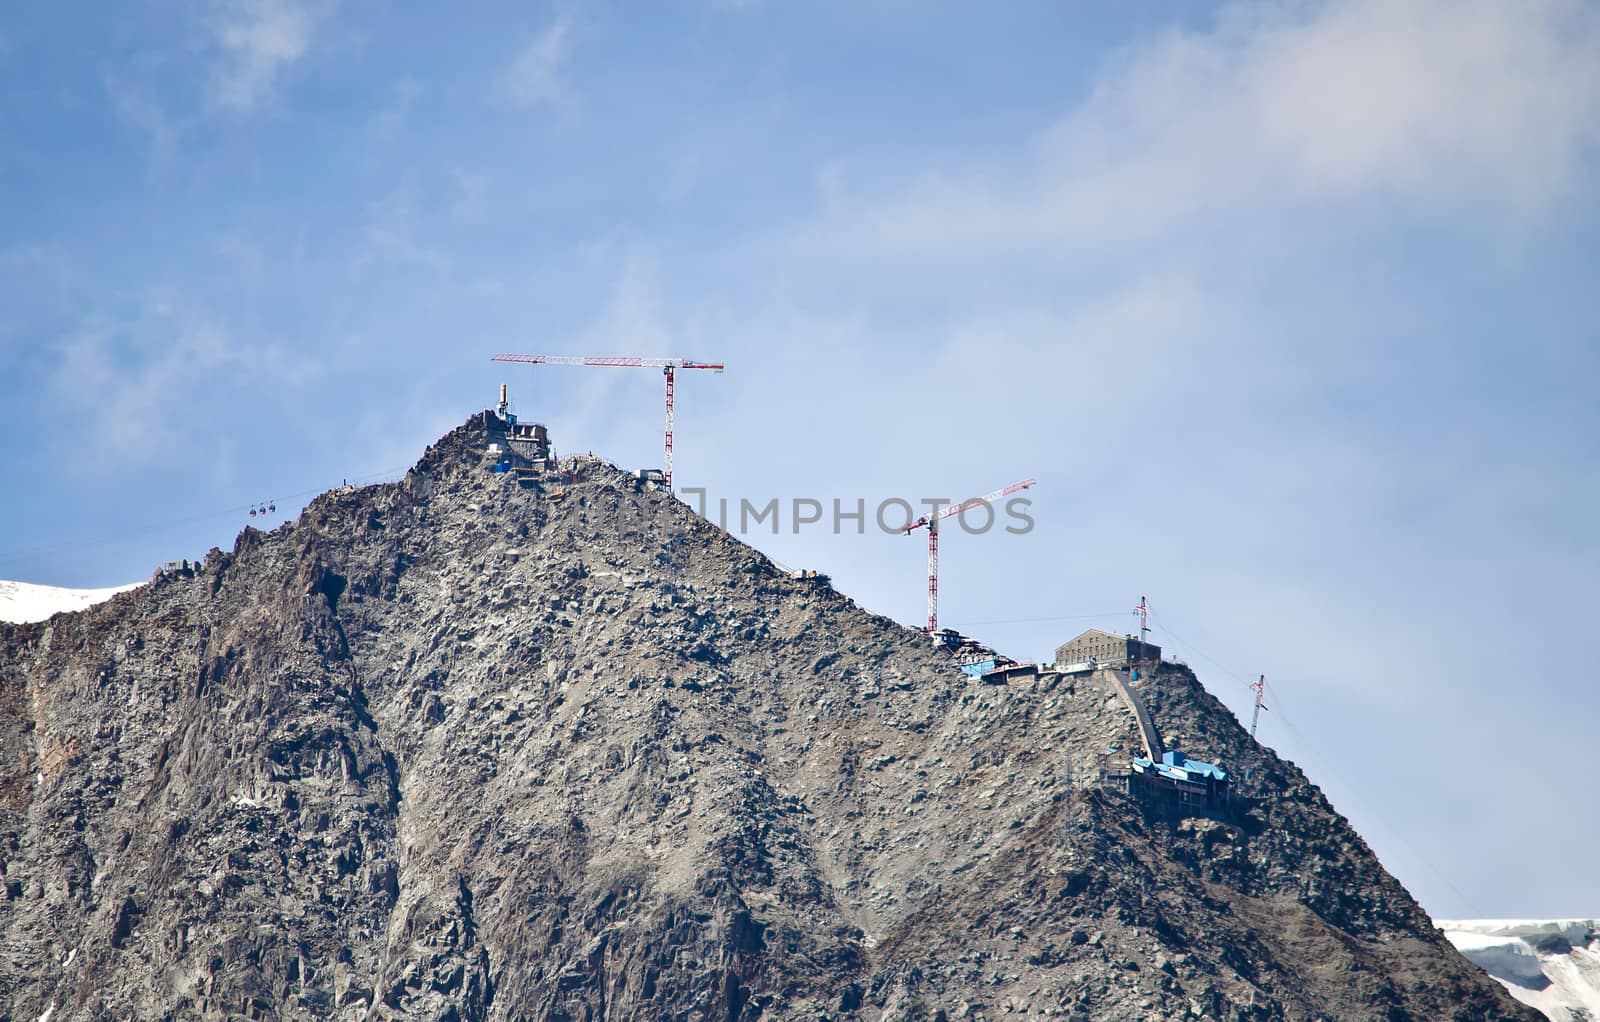 Cranes building on top of mountain by artofphoto